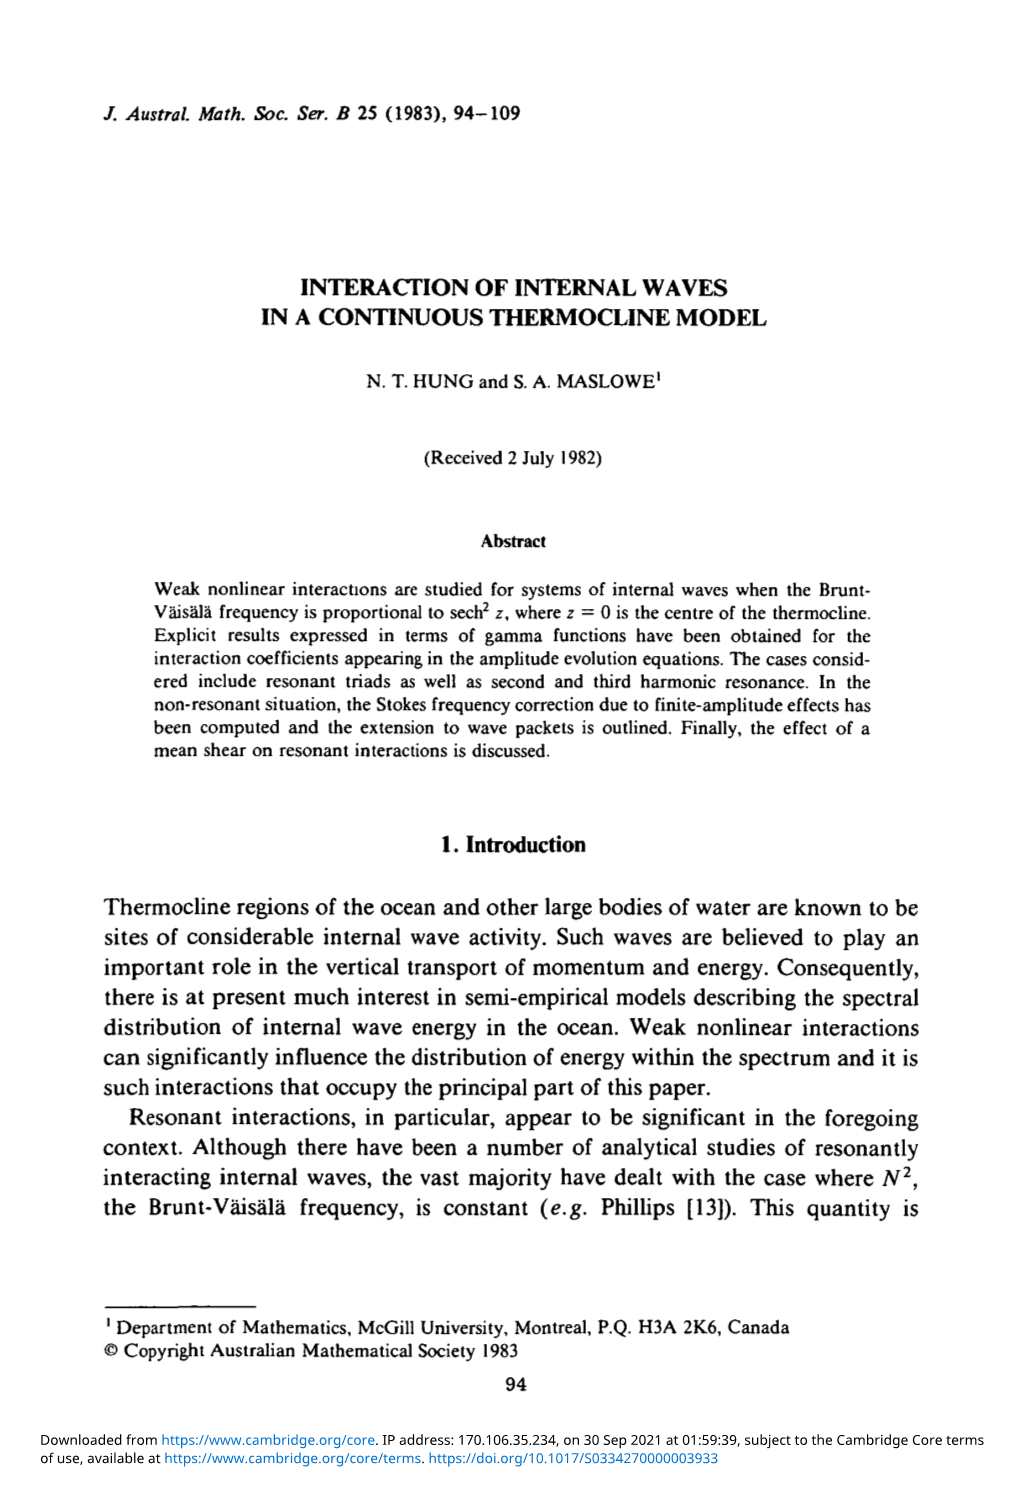 Interaction of Internal Waves in a Continuous Thermocline Model